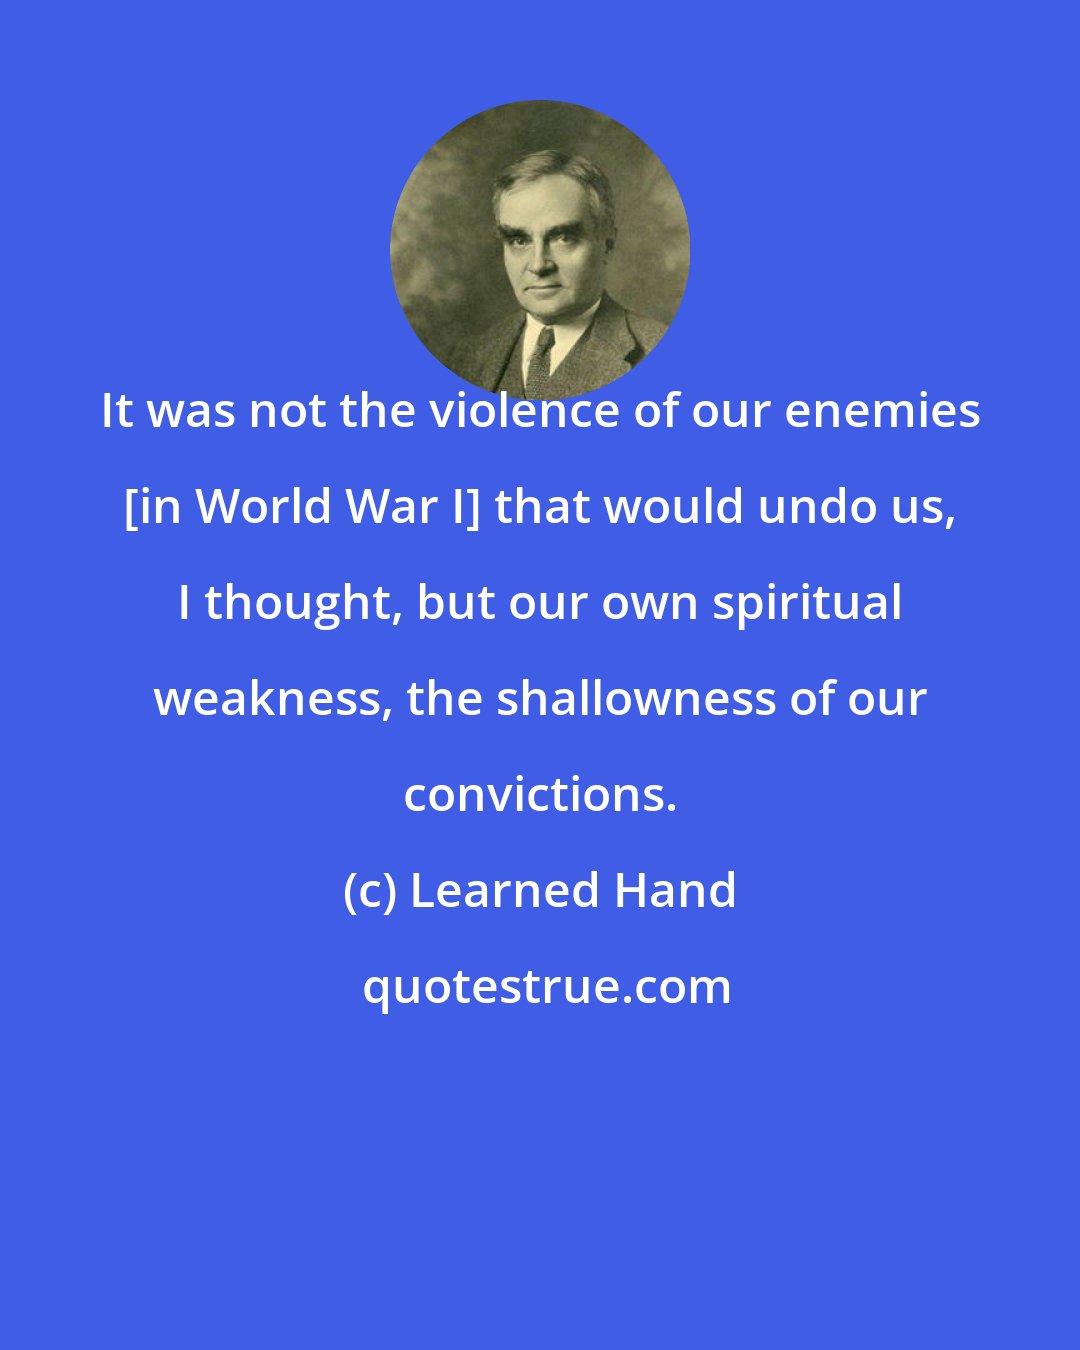 Learned Hand: It was not the violence of our enemies [in World War I] that would undo us, I thought, but our own spiritual weakness, the shallowness of our convictions.